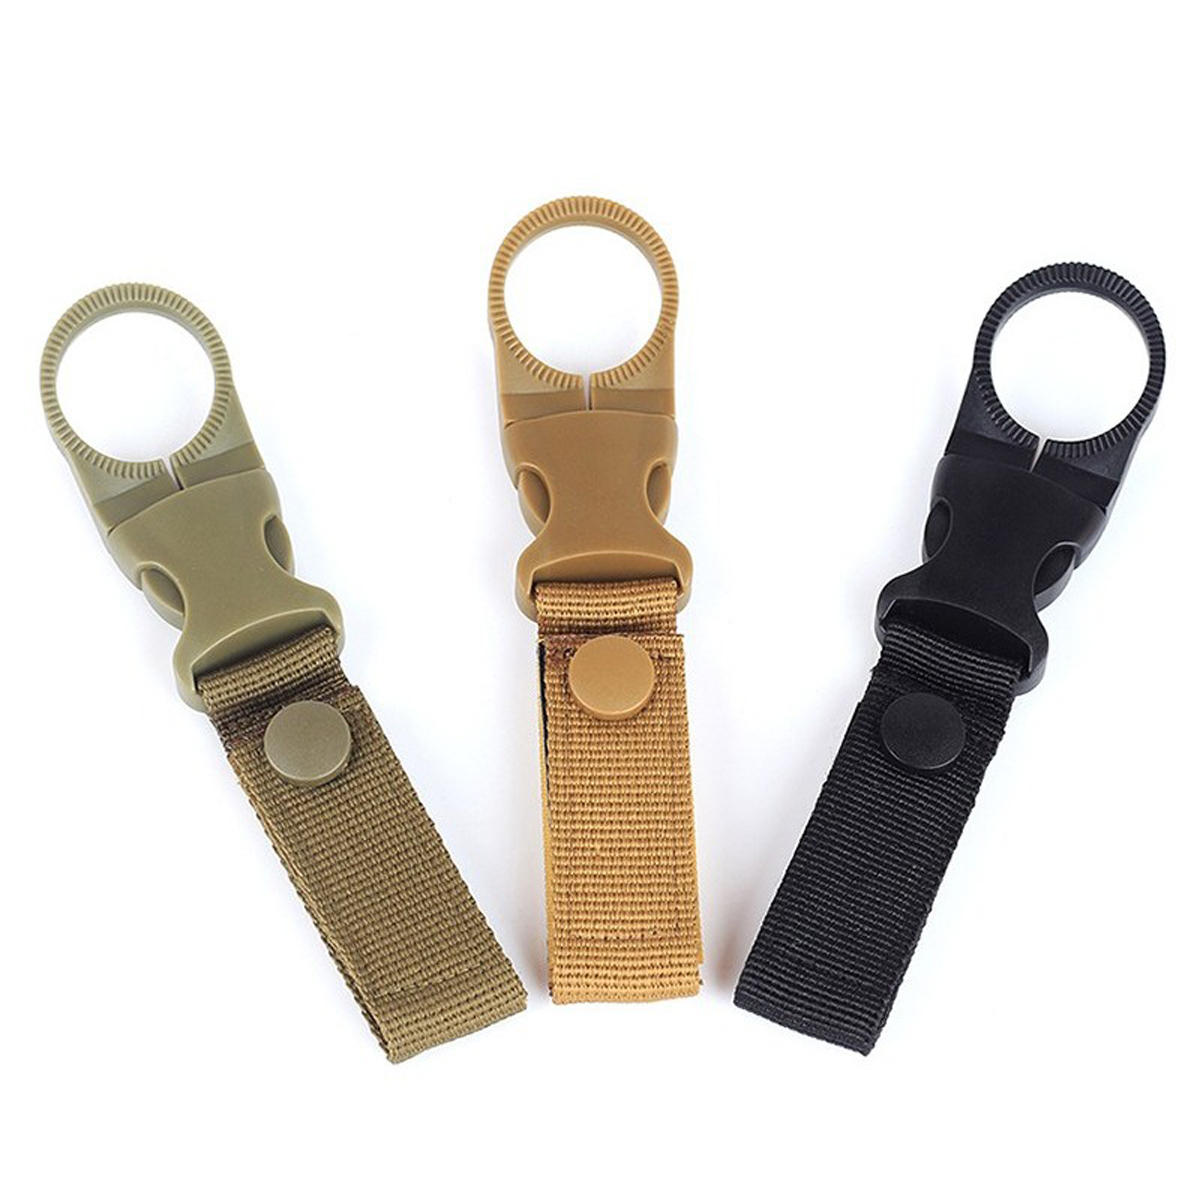 AWMN R1 Gear Clip Nylon Camouflage Outdoor Camping Hunting Buckle Bottle Carrier Tactical Belt